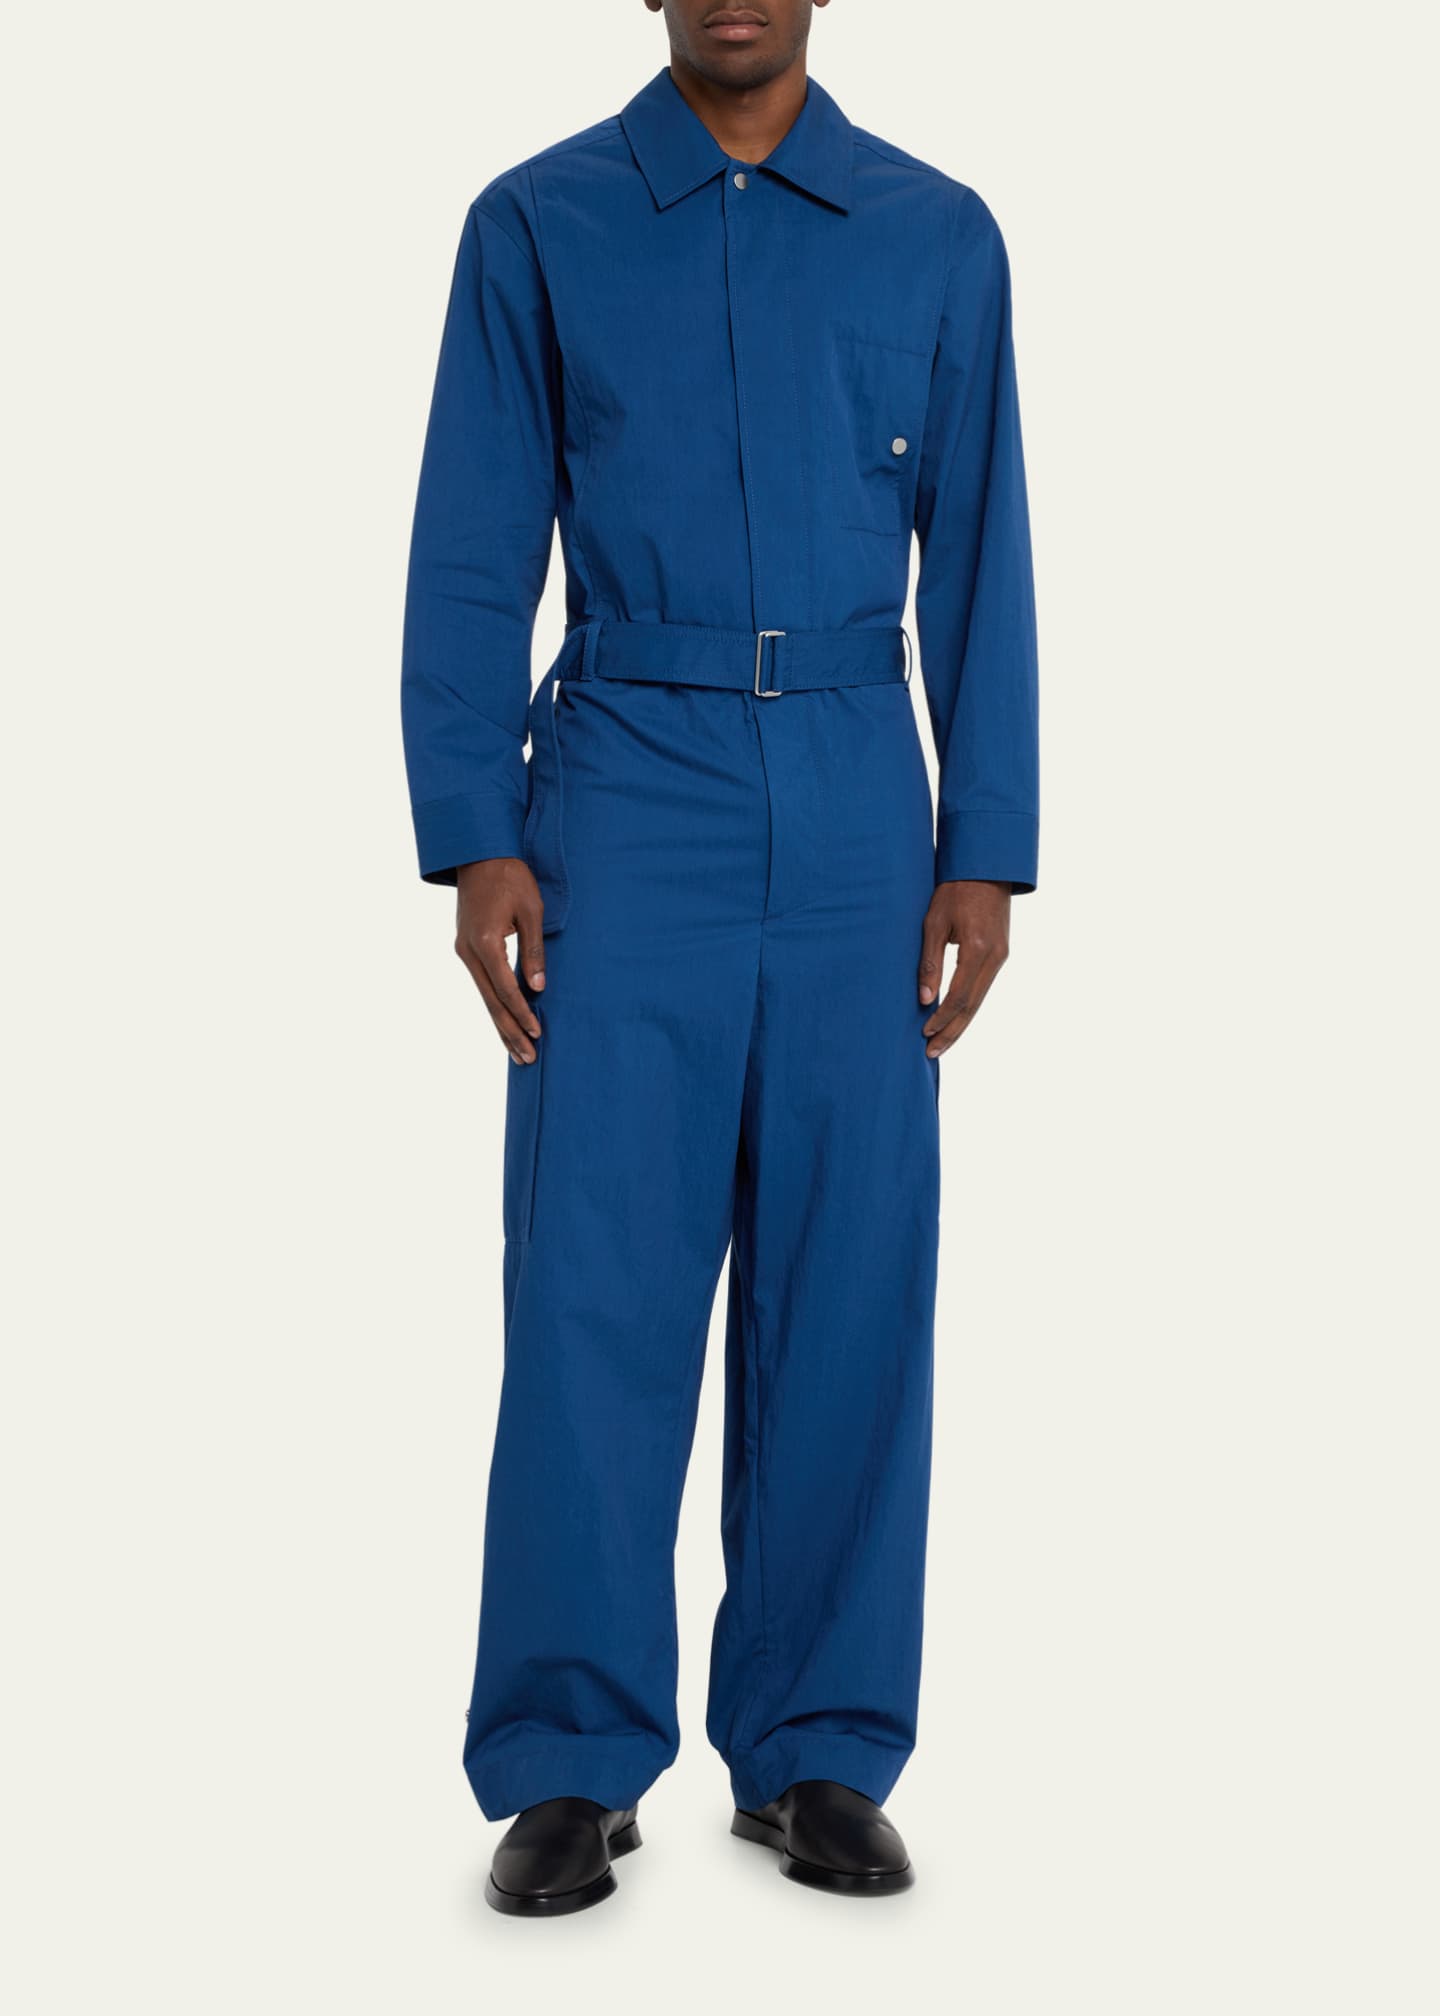 3.1 Phillip Lim Men's Relaxed Belted Jumpsuit - Bergdorf Goodman